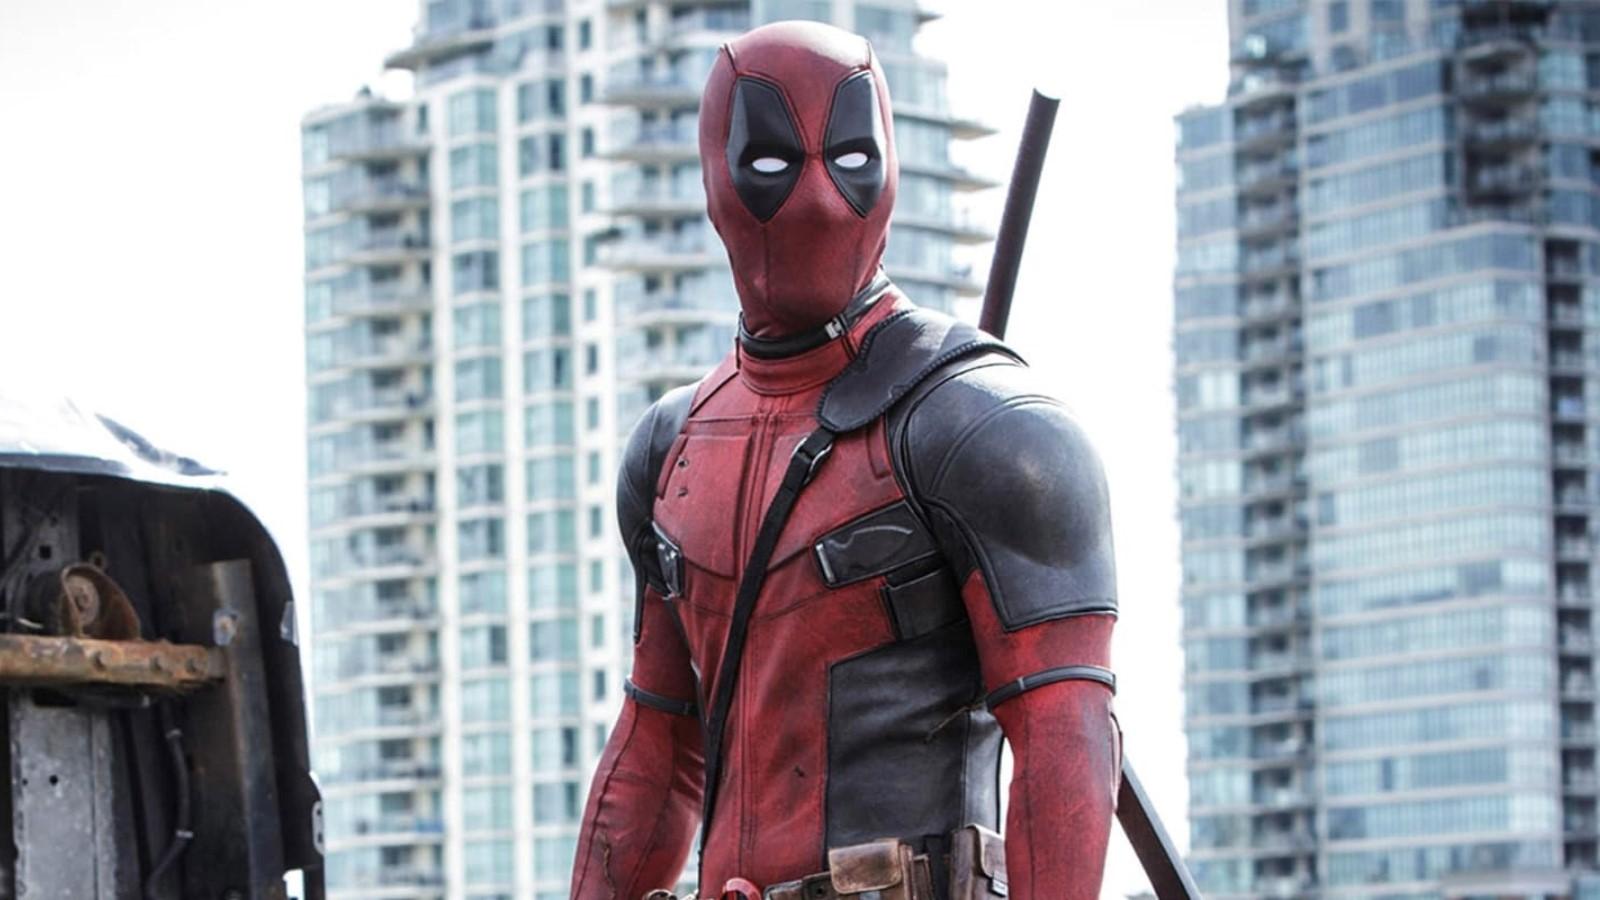 Deadpool standing in front of a building, looking outwards